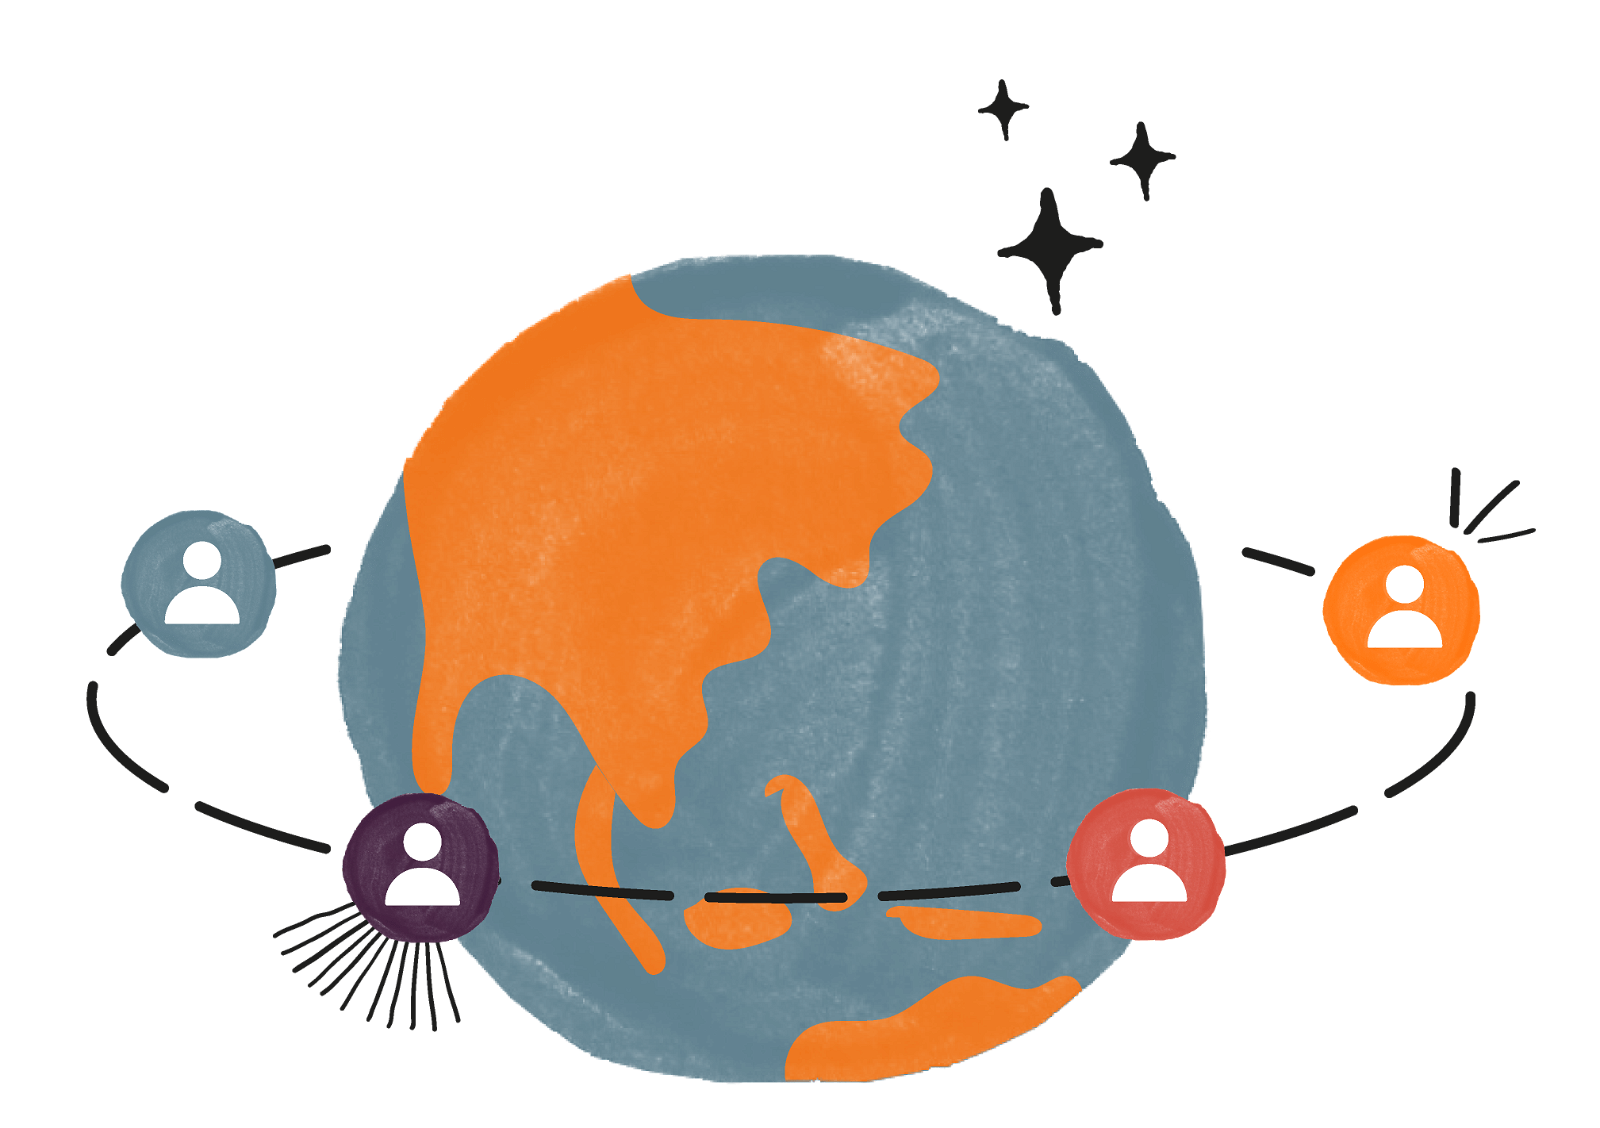 stribe dispersed workforce and remote working icon - world of people